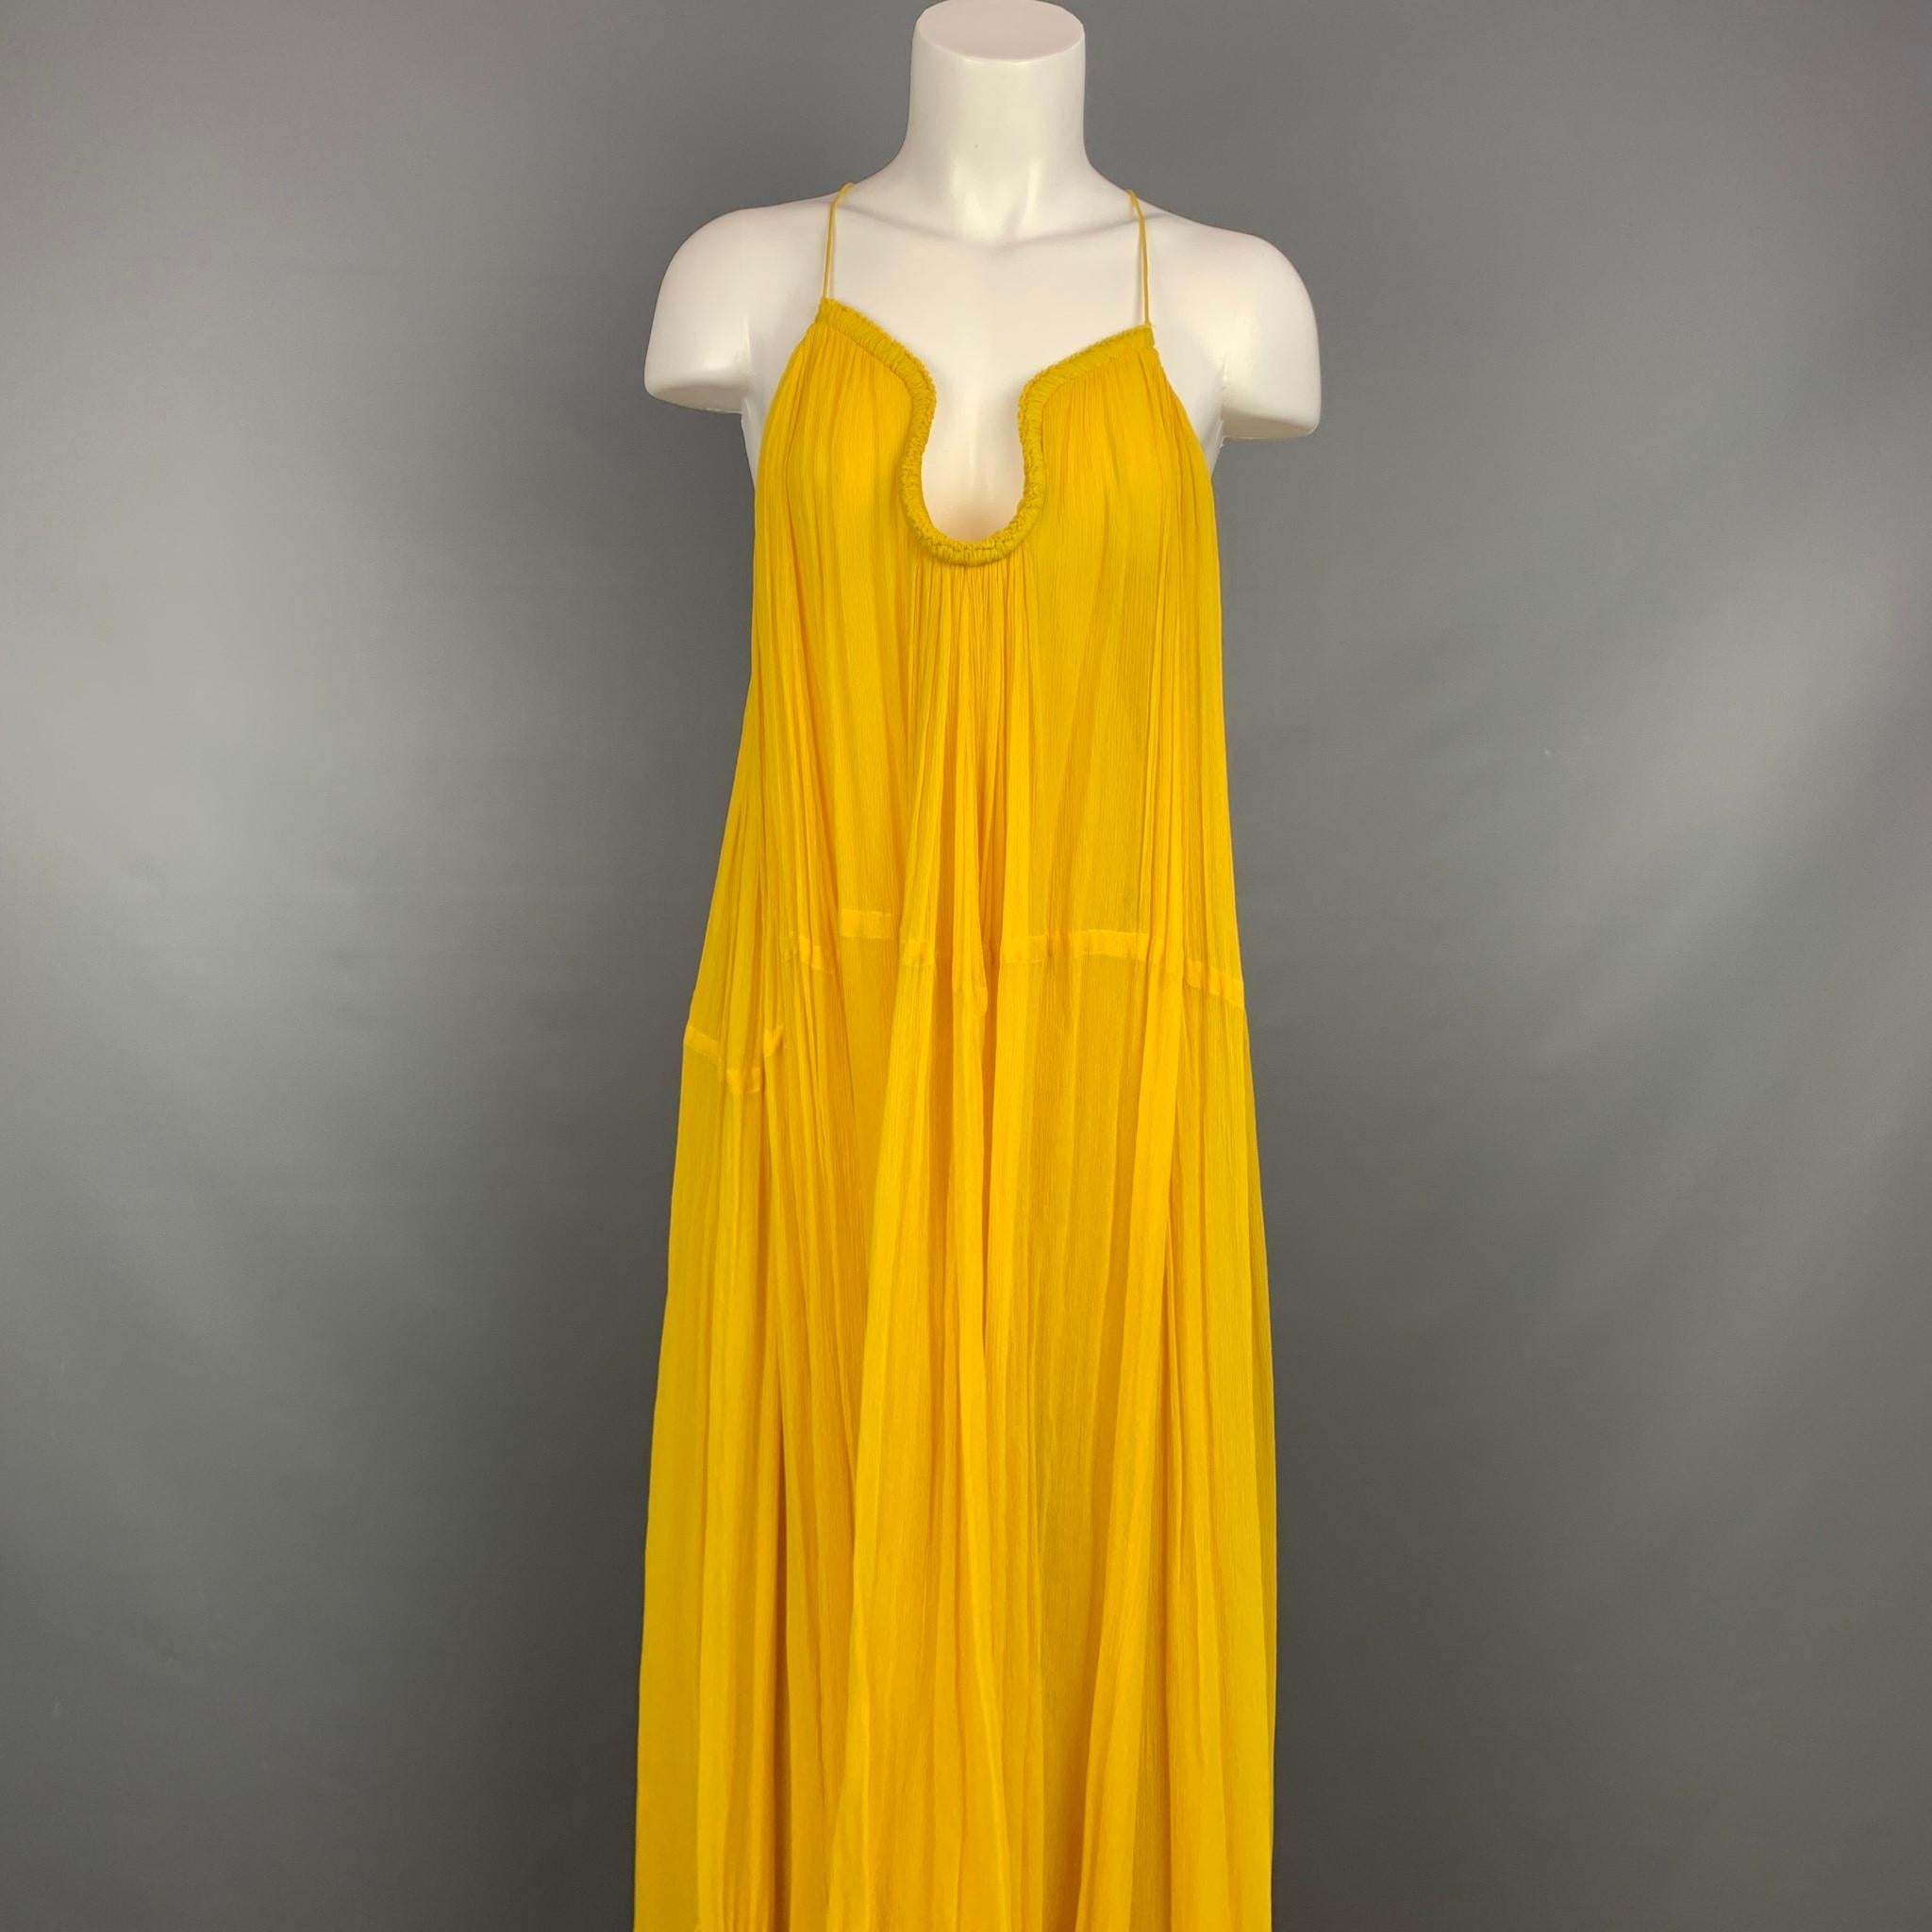 CHLOE S/S 15 dress comes in a corn yellow pleated silk-viole featuring a maxi style, pleated, and a metal piped curved neckline with spaghetti straps. Made in France.

Good Pre-Owned Condition. One run at lower area.
Marked: FR 36
Original Retail